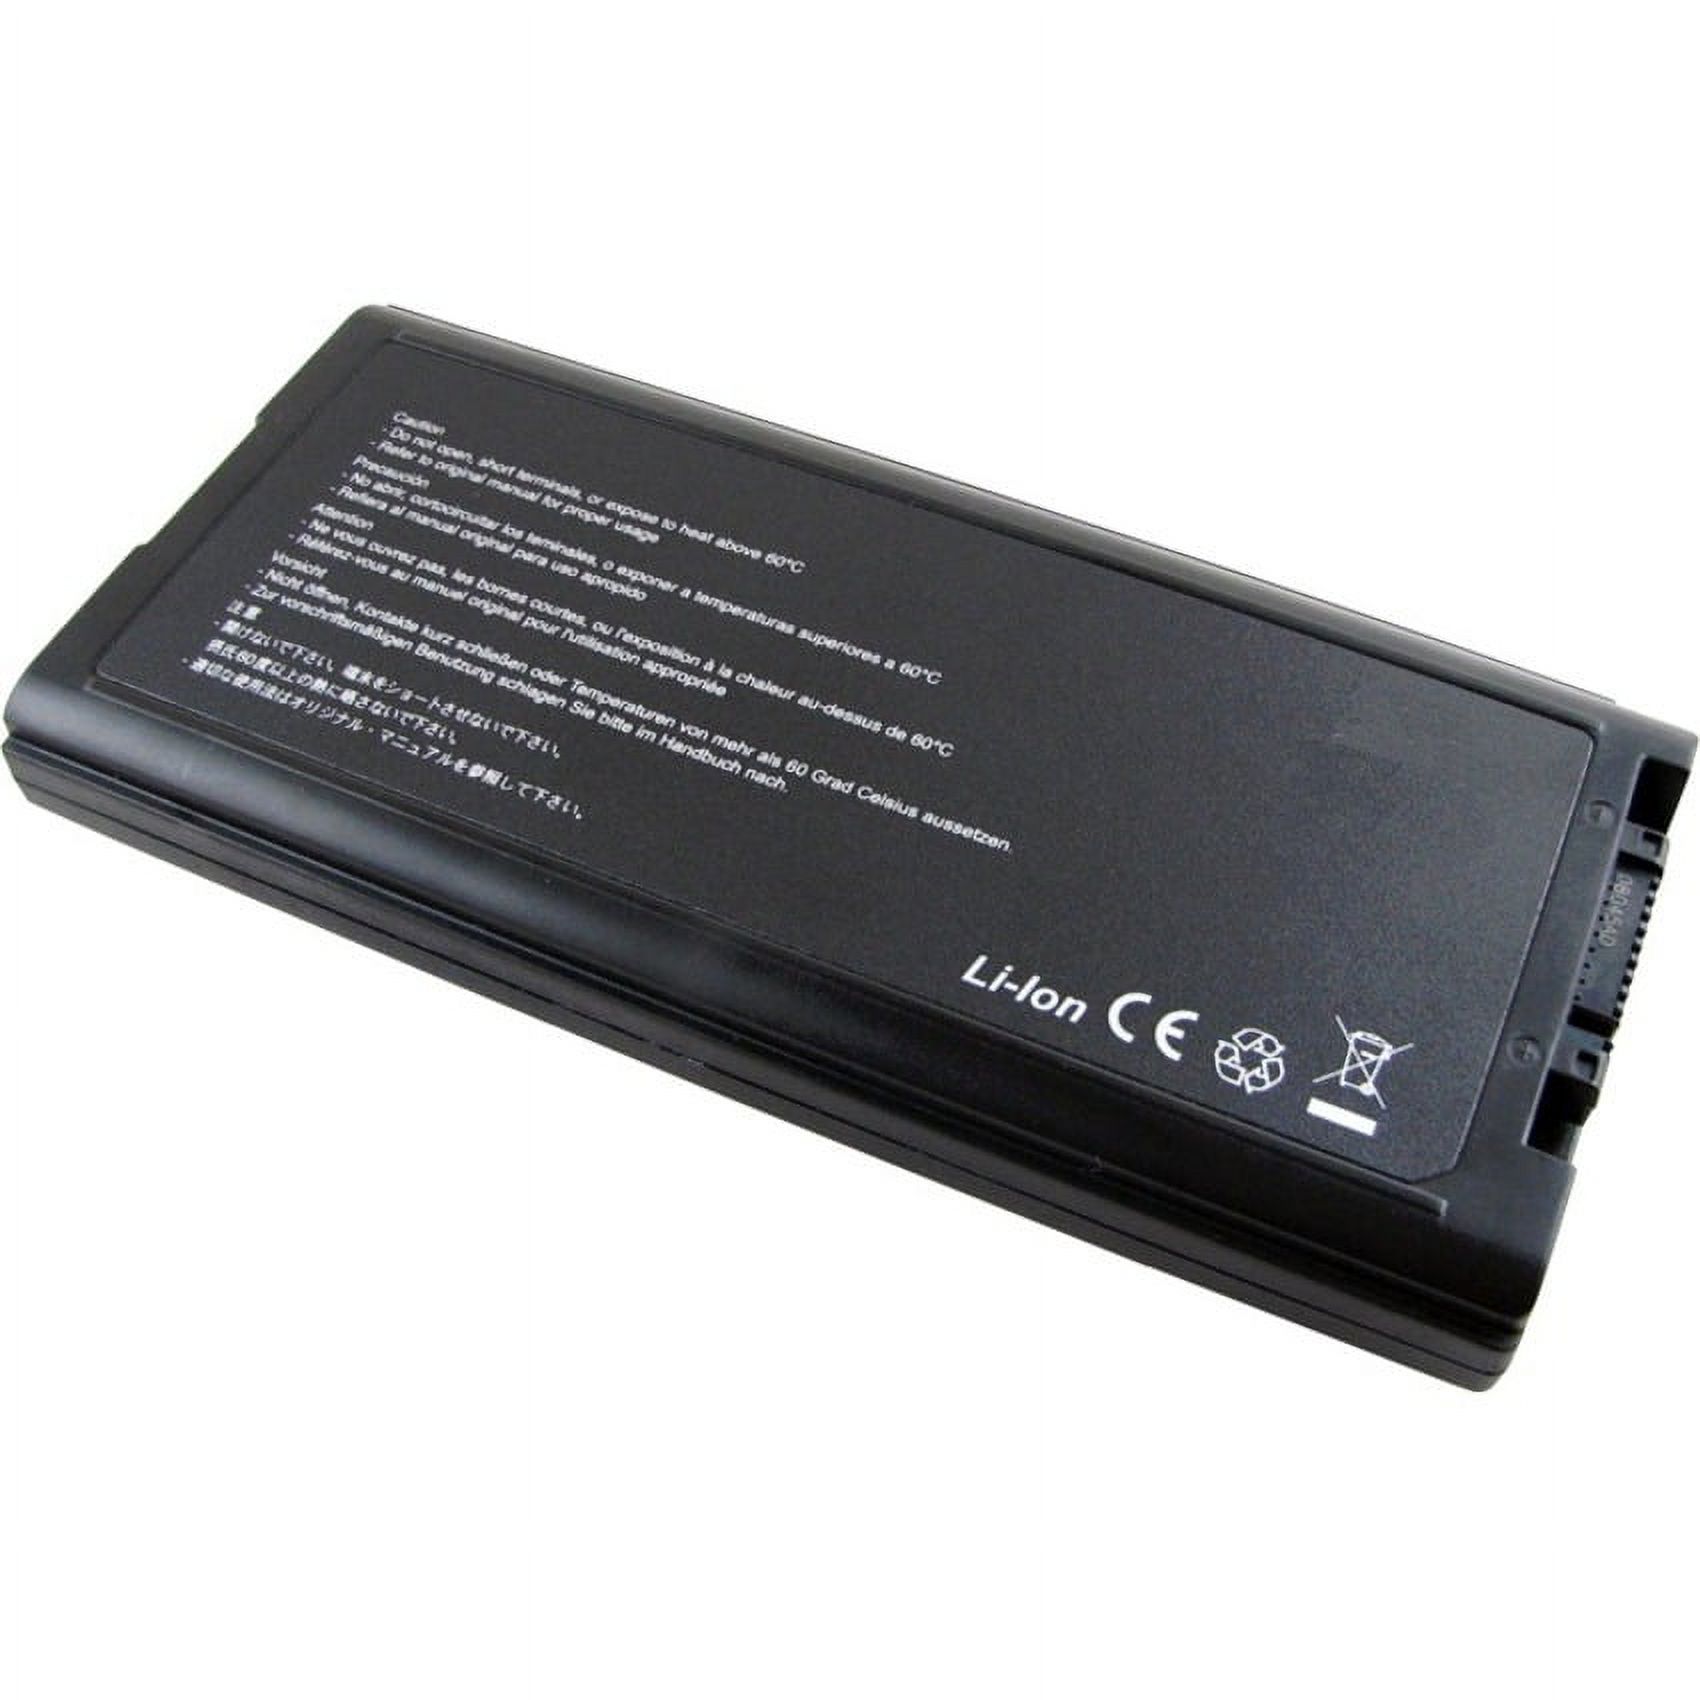 V7 Replacement Battery FOR PANASONIC CF-52 OEM# CF-VZSU29ASU CFVZSU29AS 9 CELL - image 1 of 2